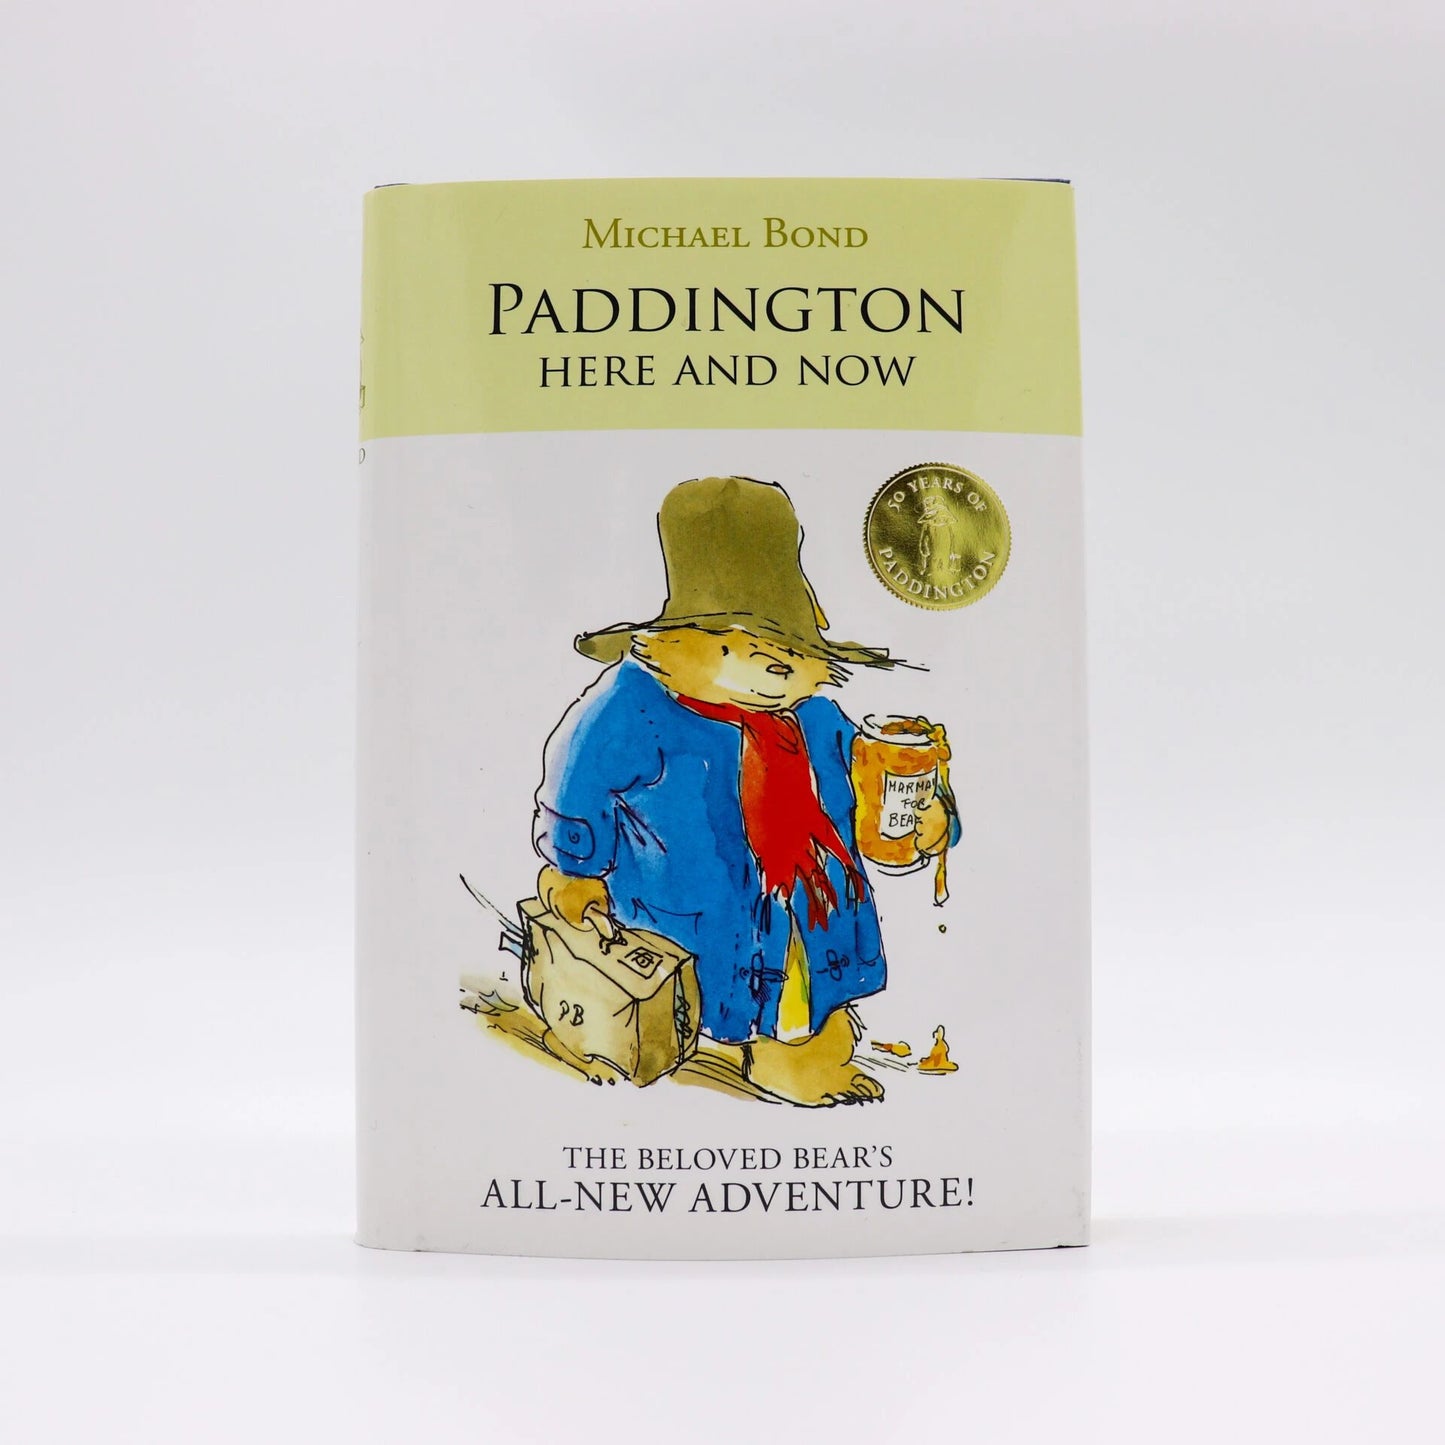 Paddington Here and Now: The Beloved Bear’s All-New Adventure! (New)